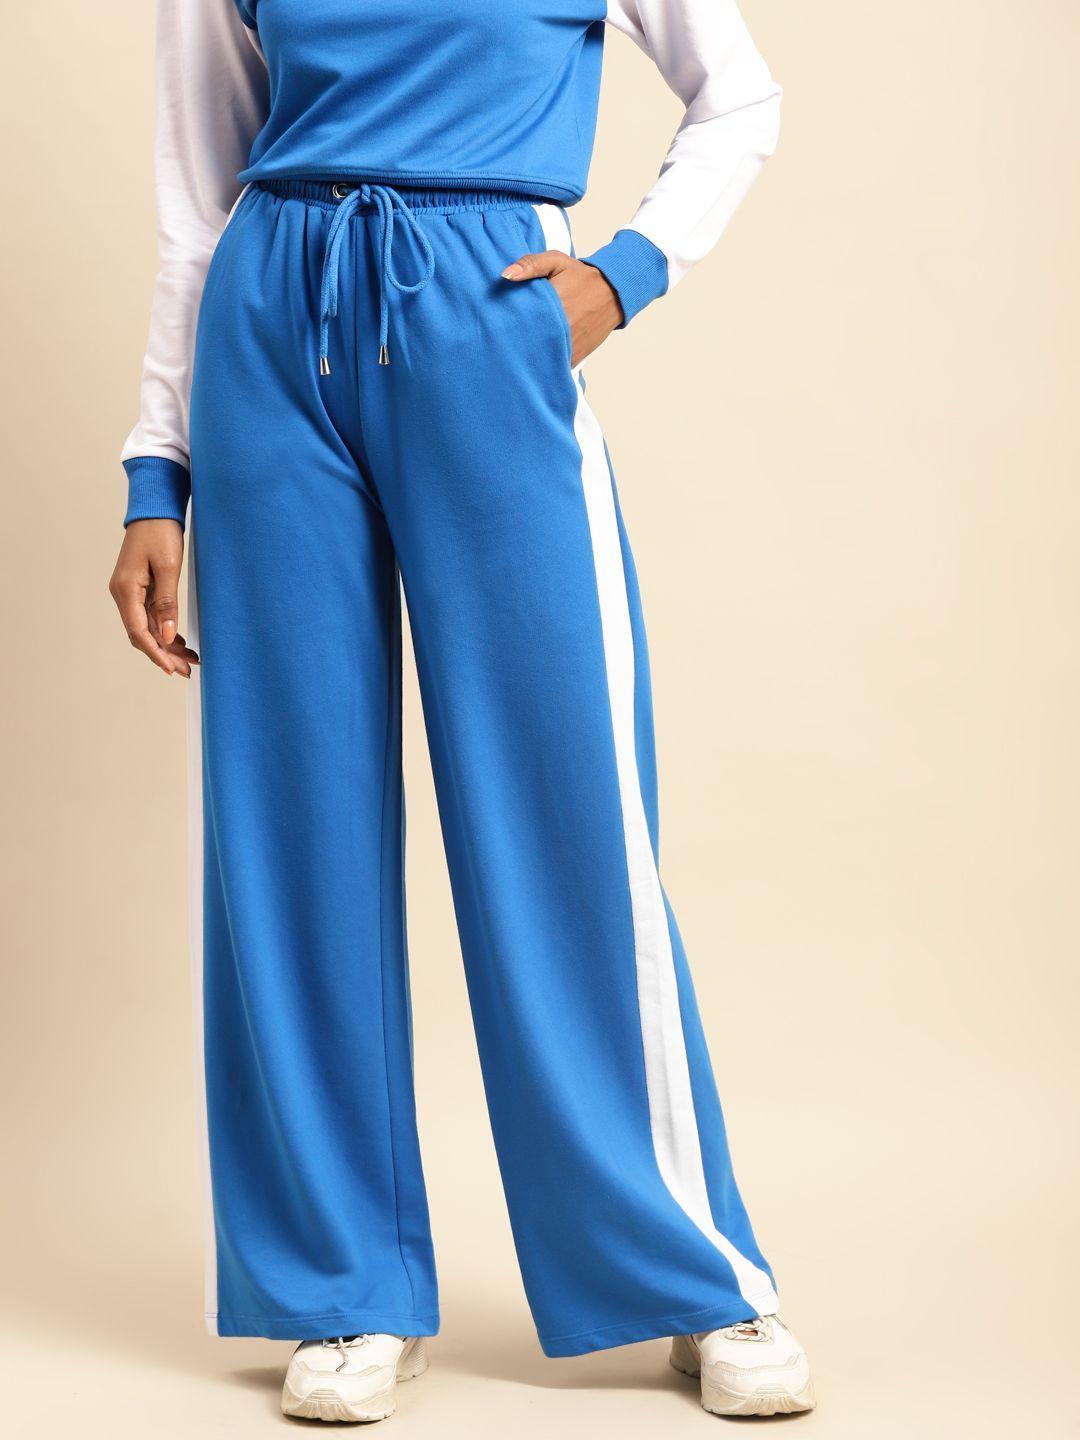 cover story women blue striped joggers trousers